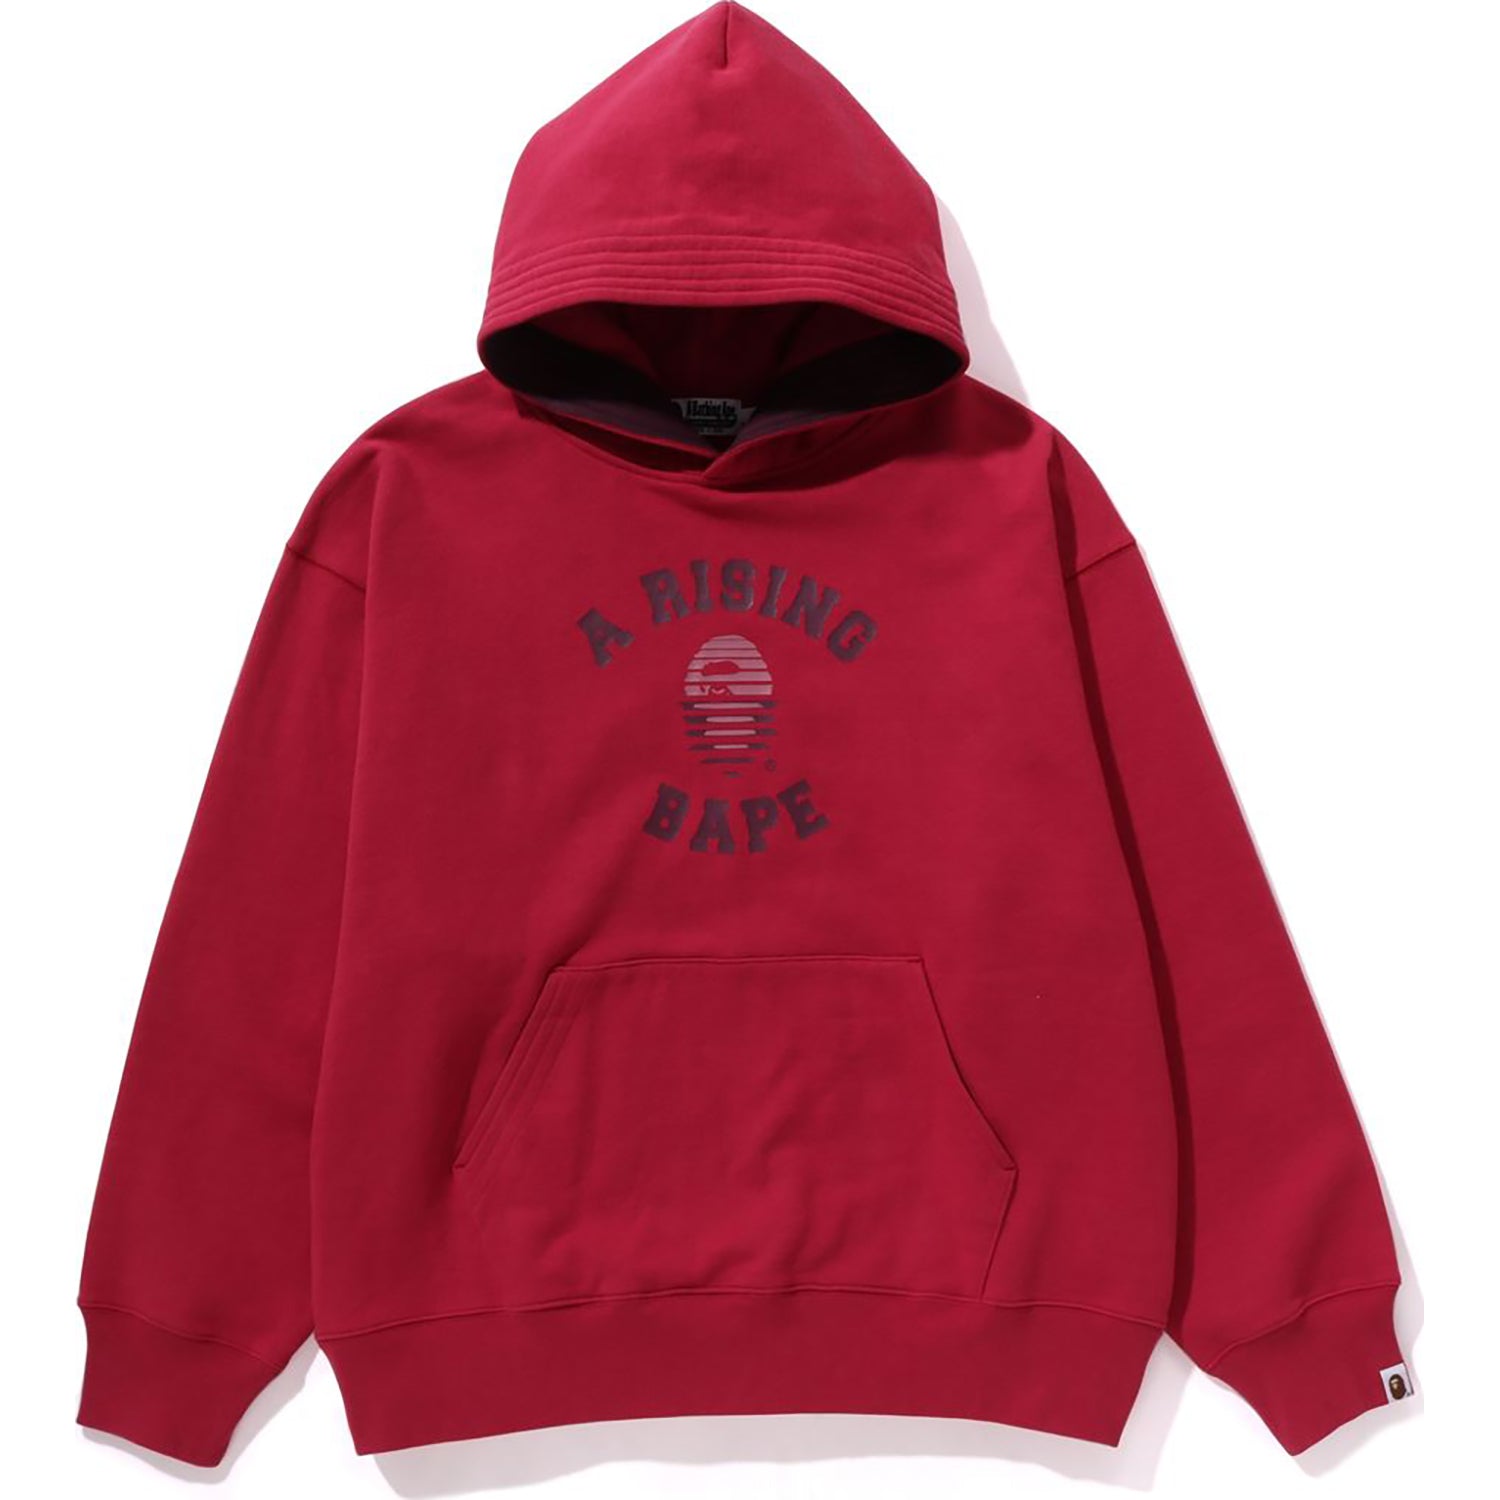 A RISING BAPE PULLOVER HOODIE RELAXED FIT MENS – us.bape.com